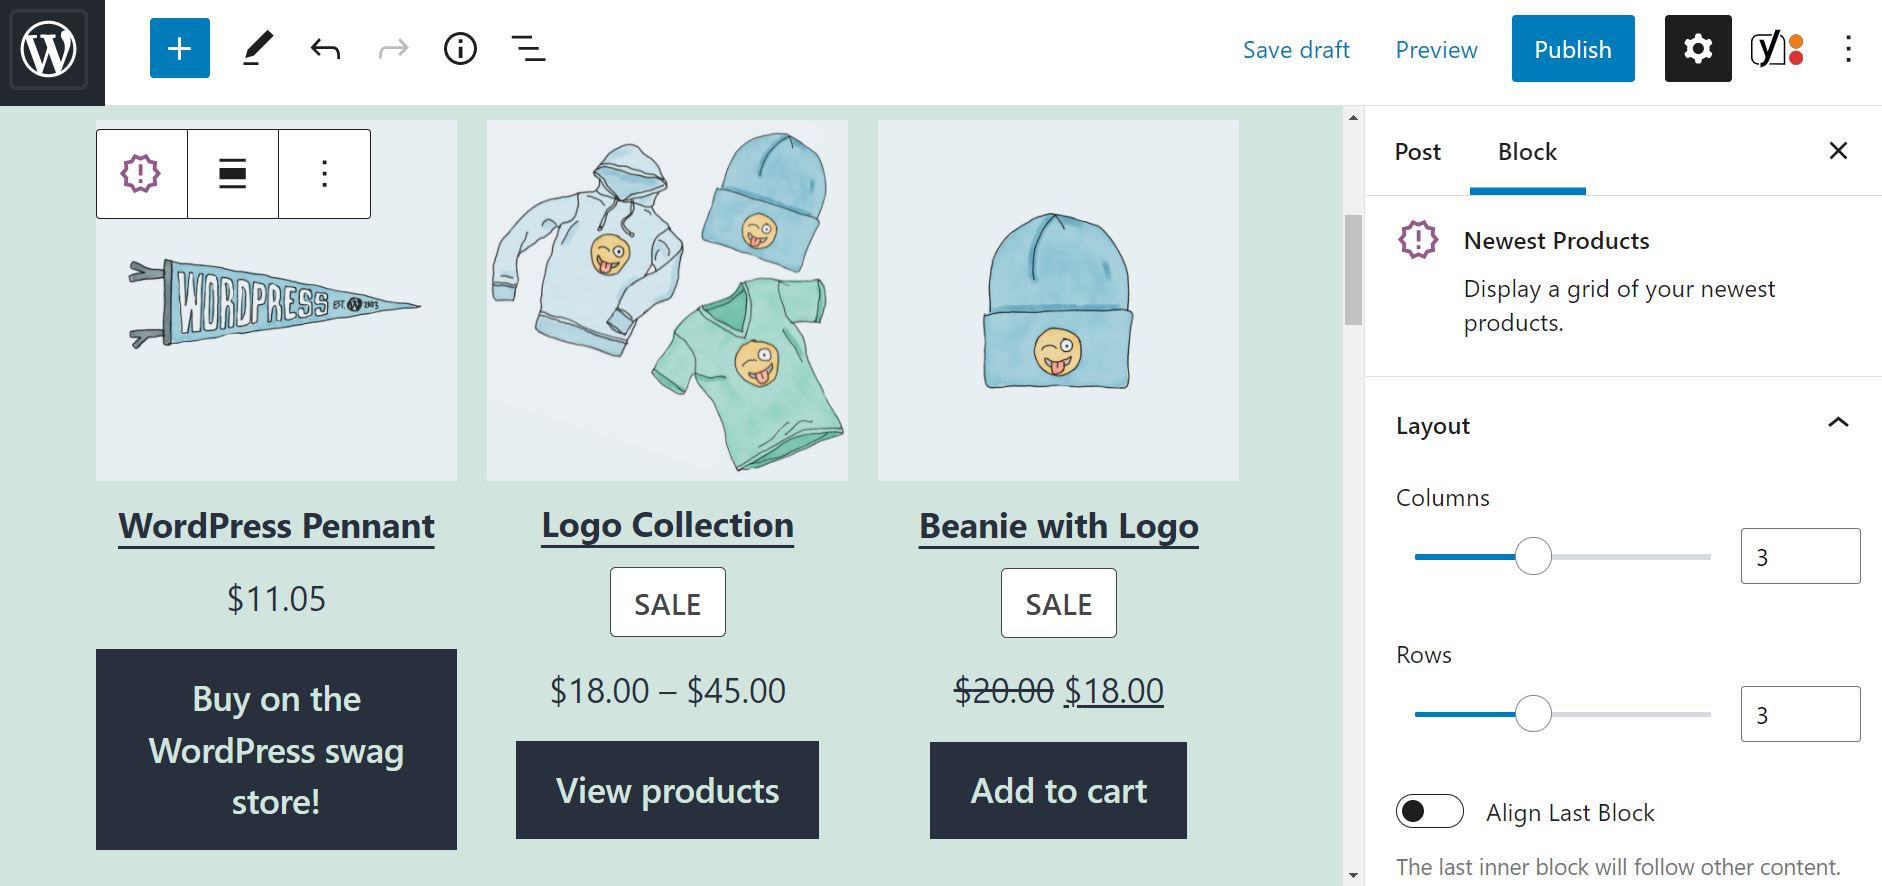 The layout settings for the Newest Products WooCommerce block